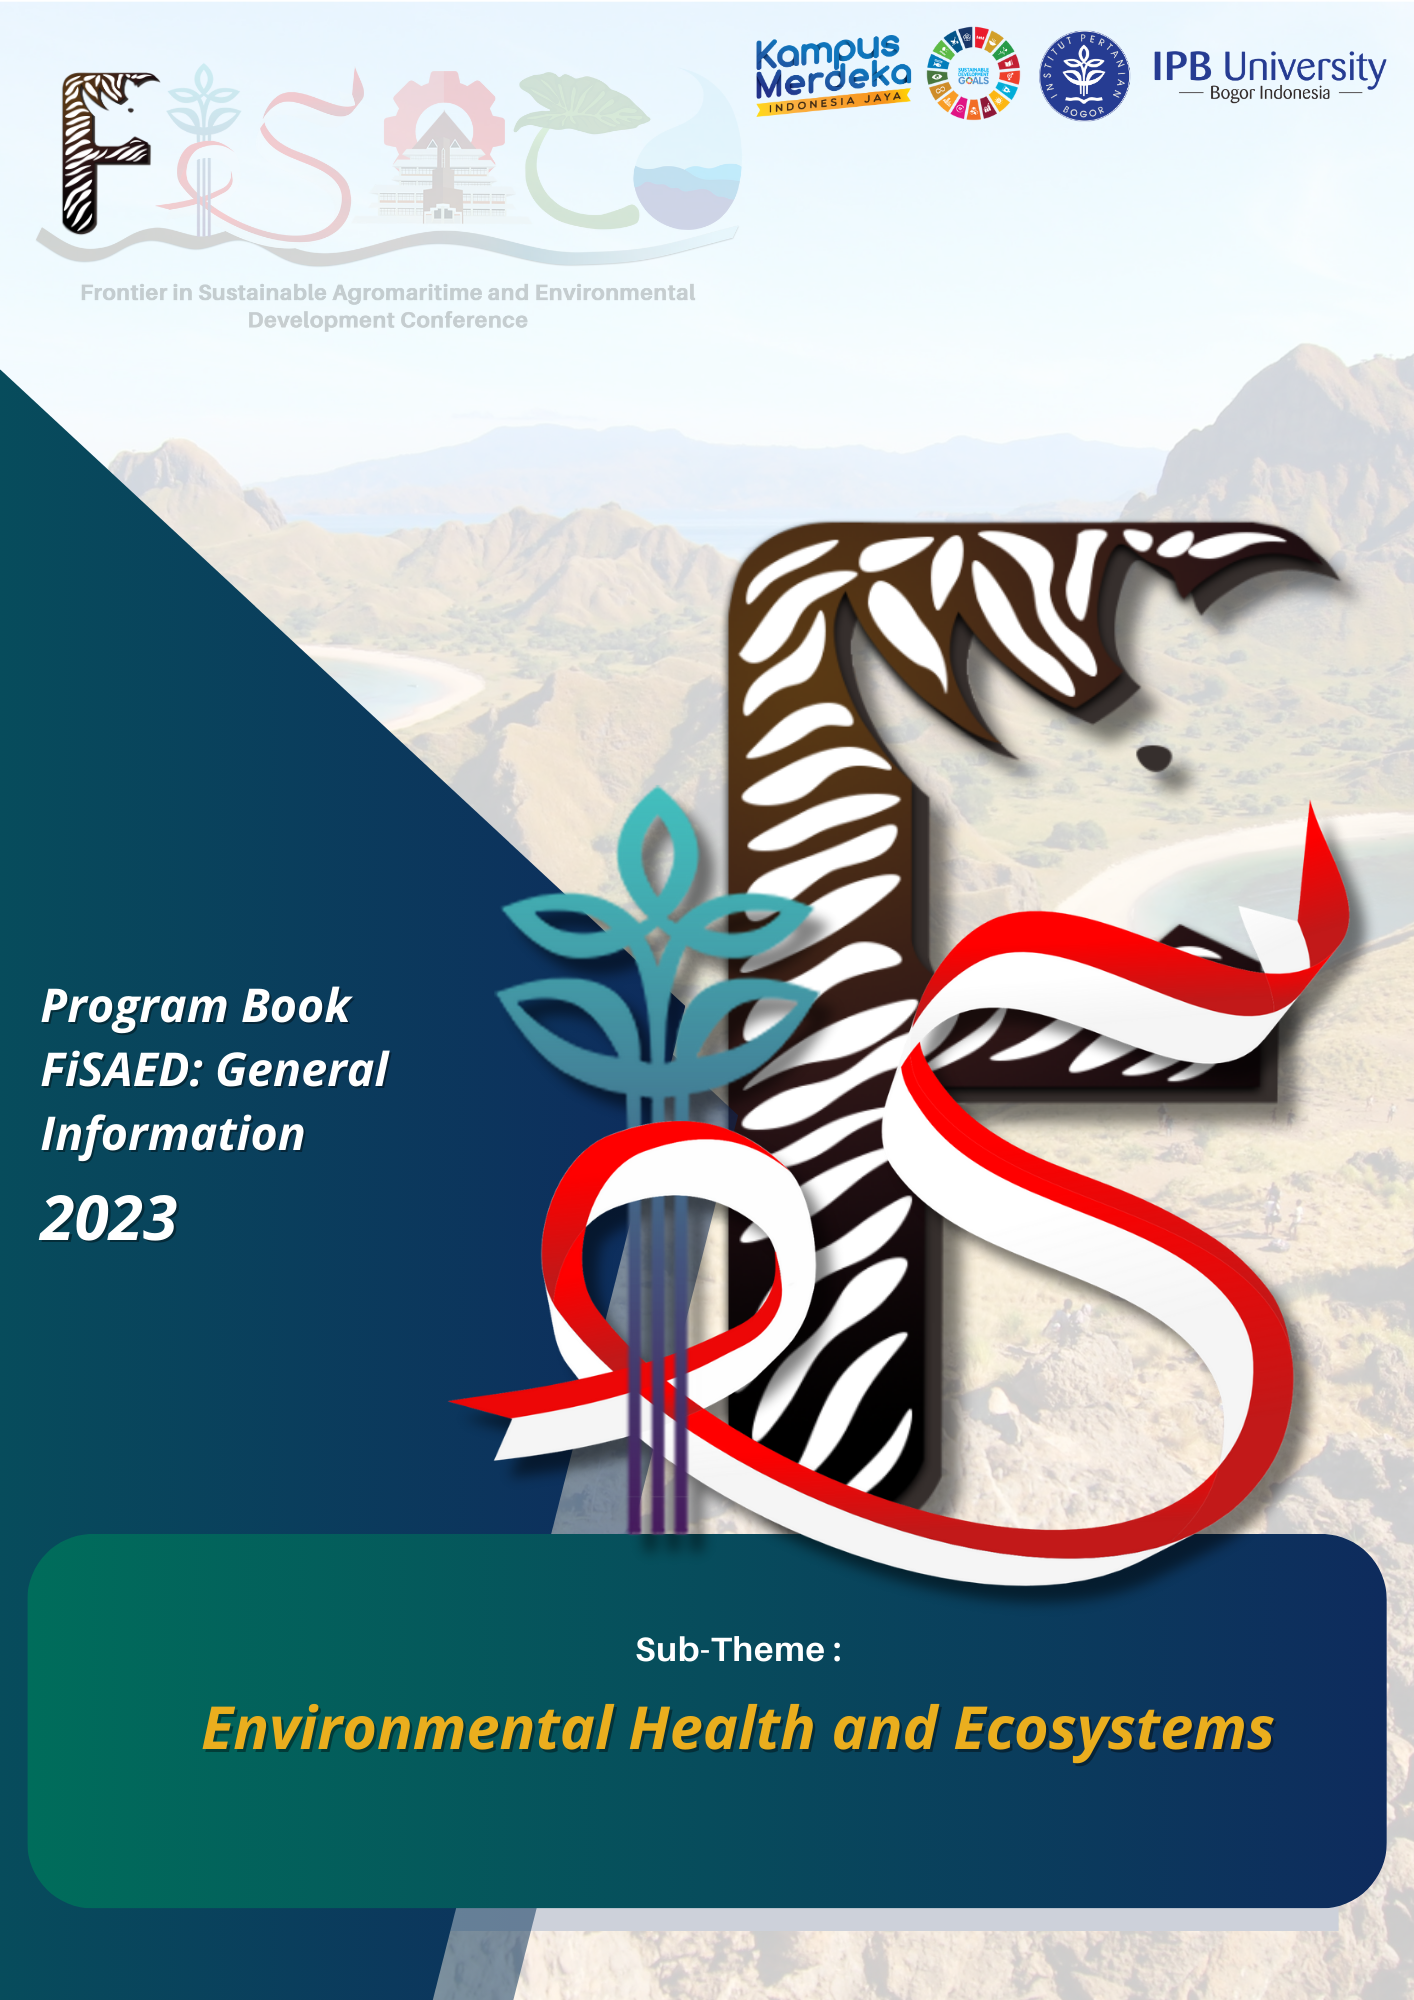 					View 2023: Program Book FiSAED: Environmental Health and Ecosystems
				